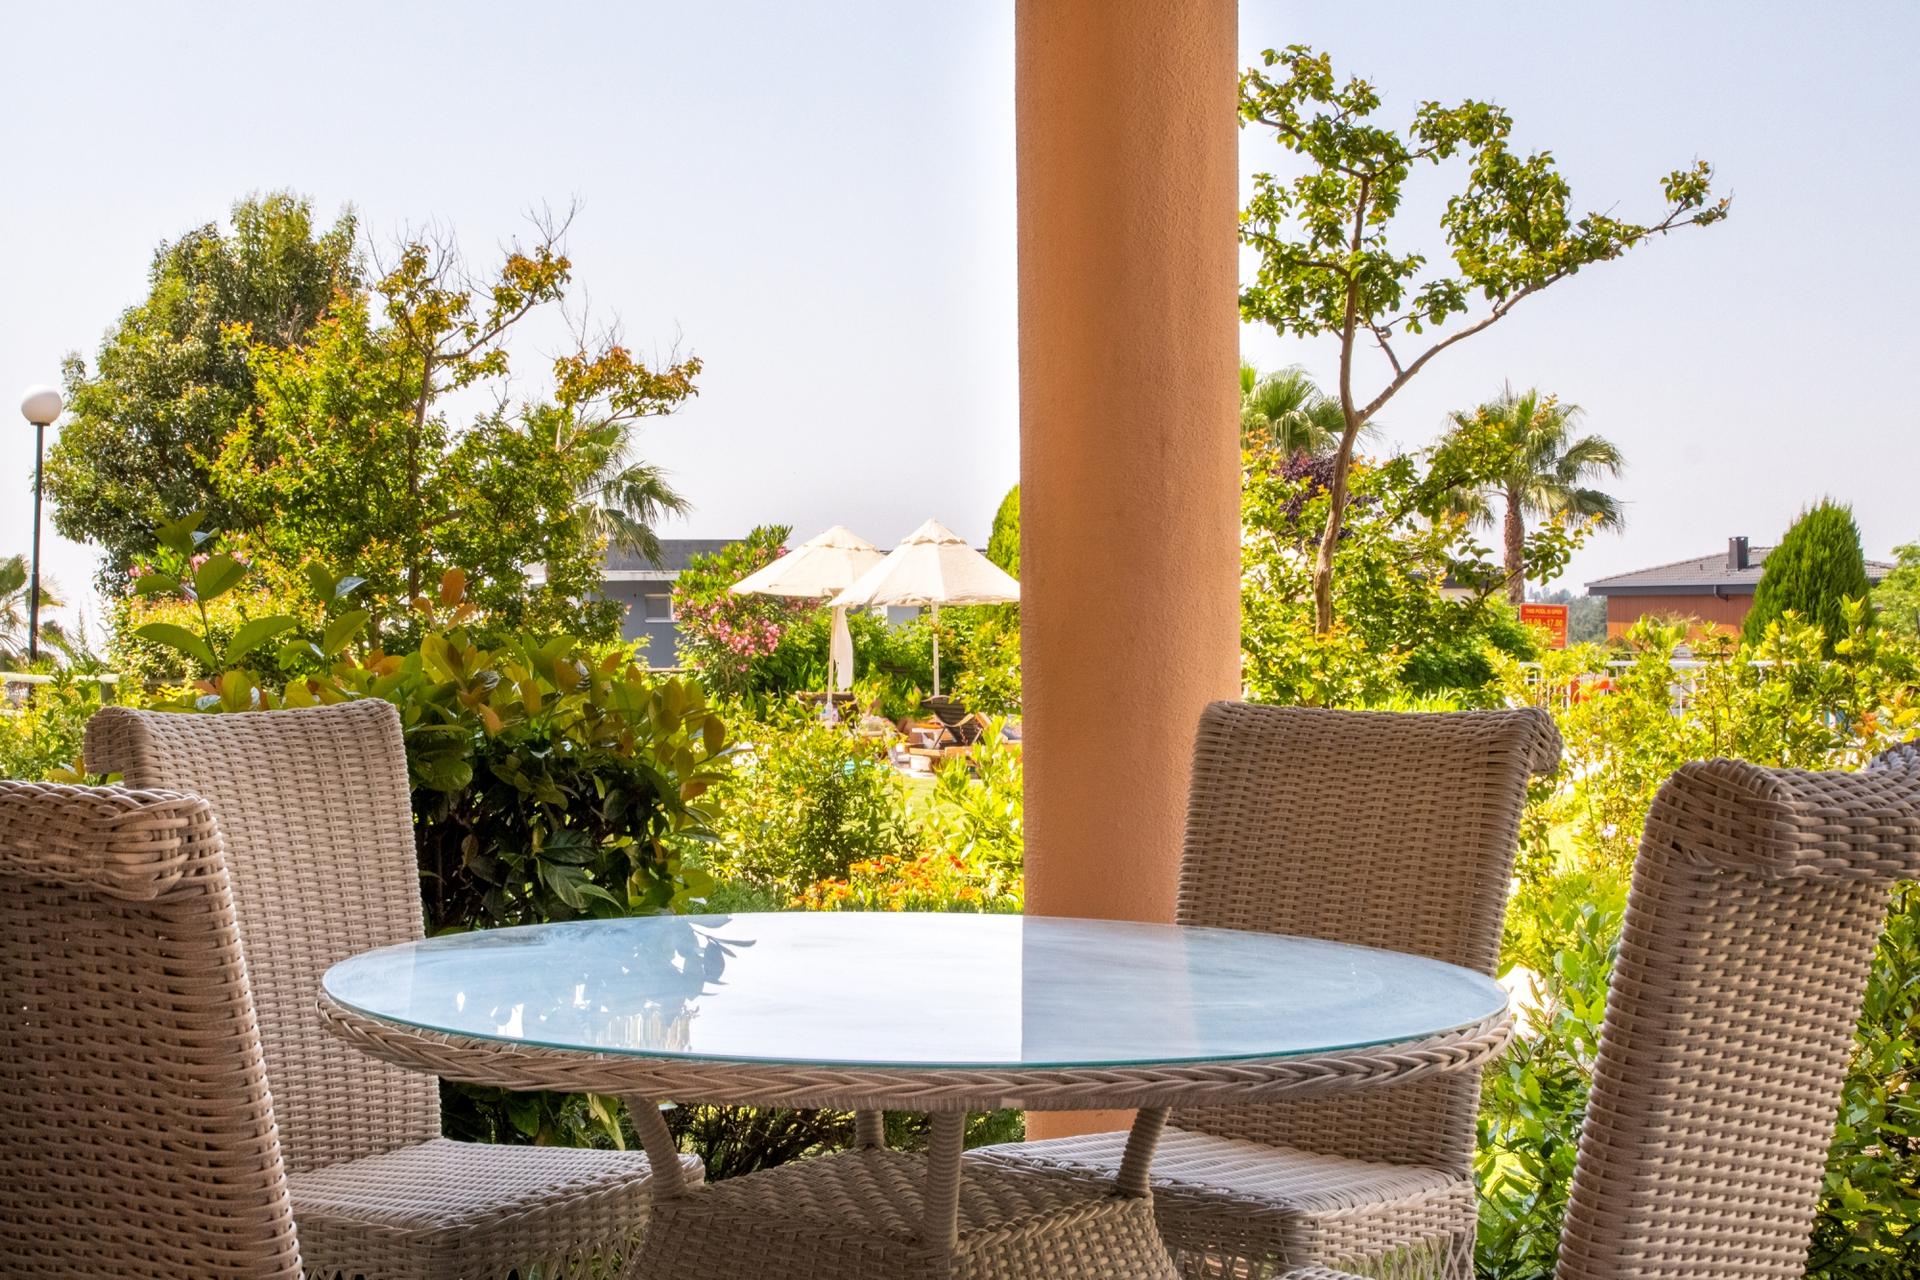 You can spend enjoyable moments with your loved ones on the balcony overlooking the backyard.